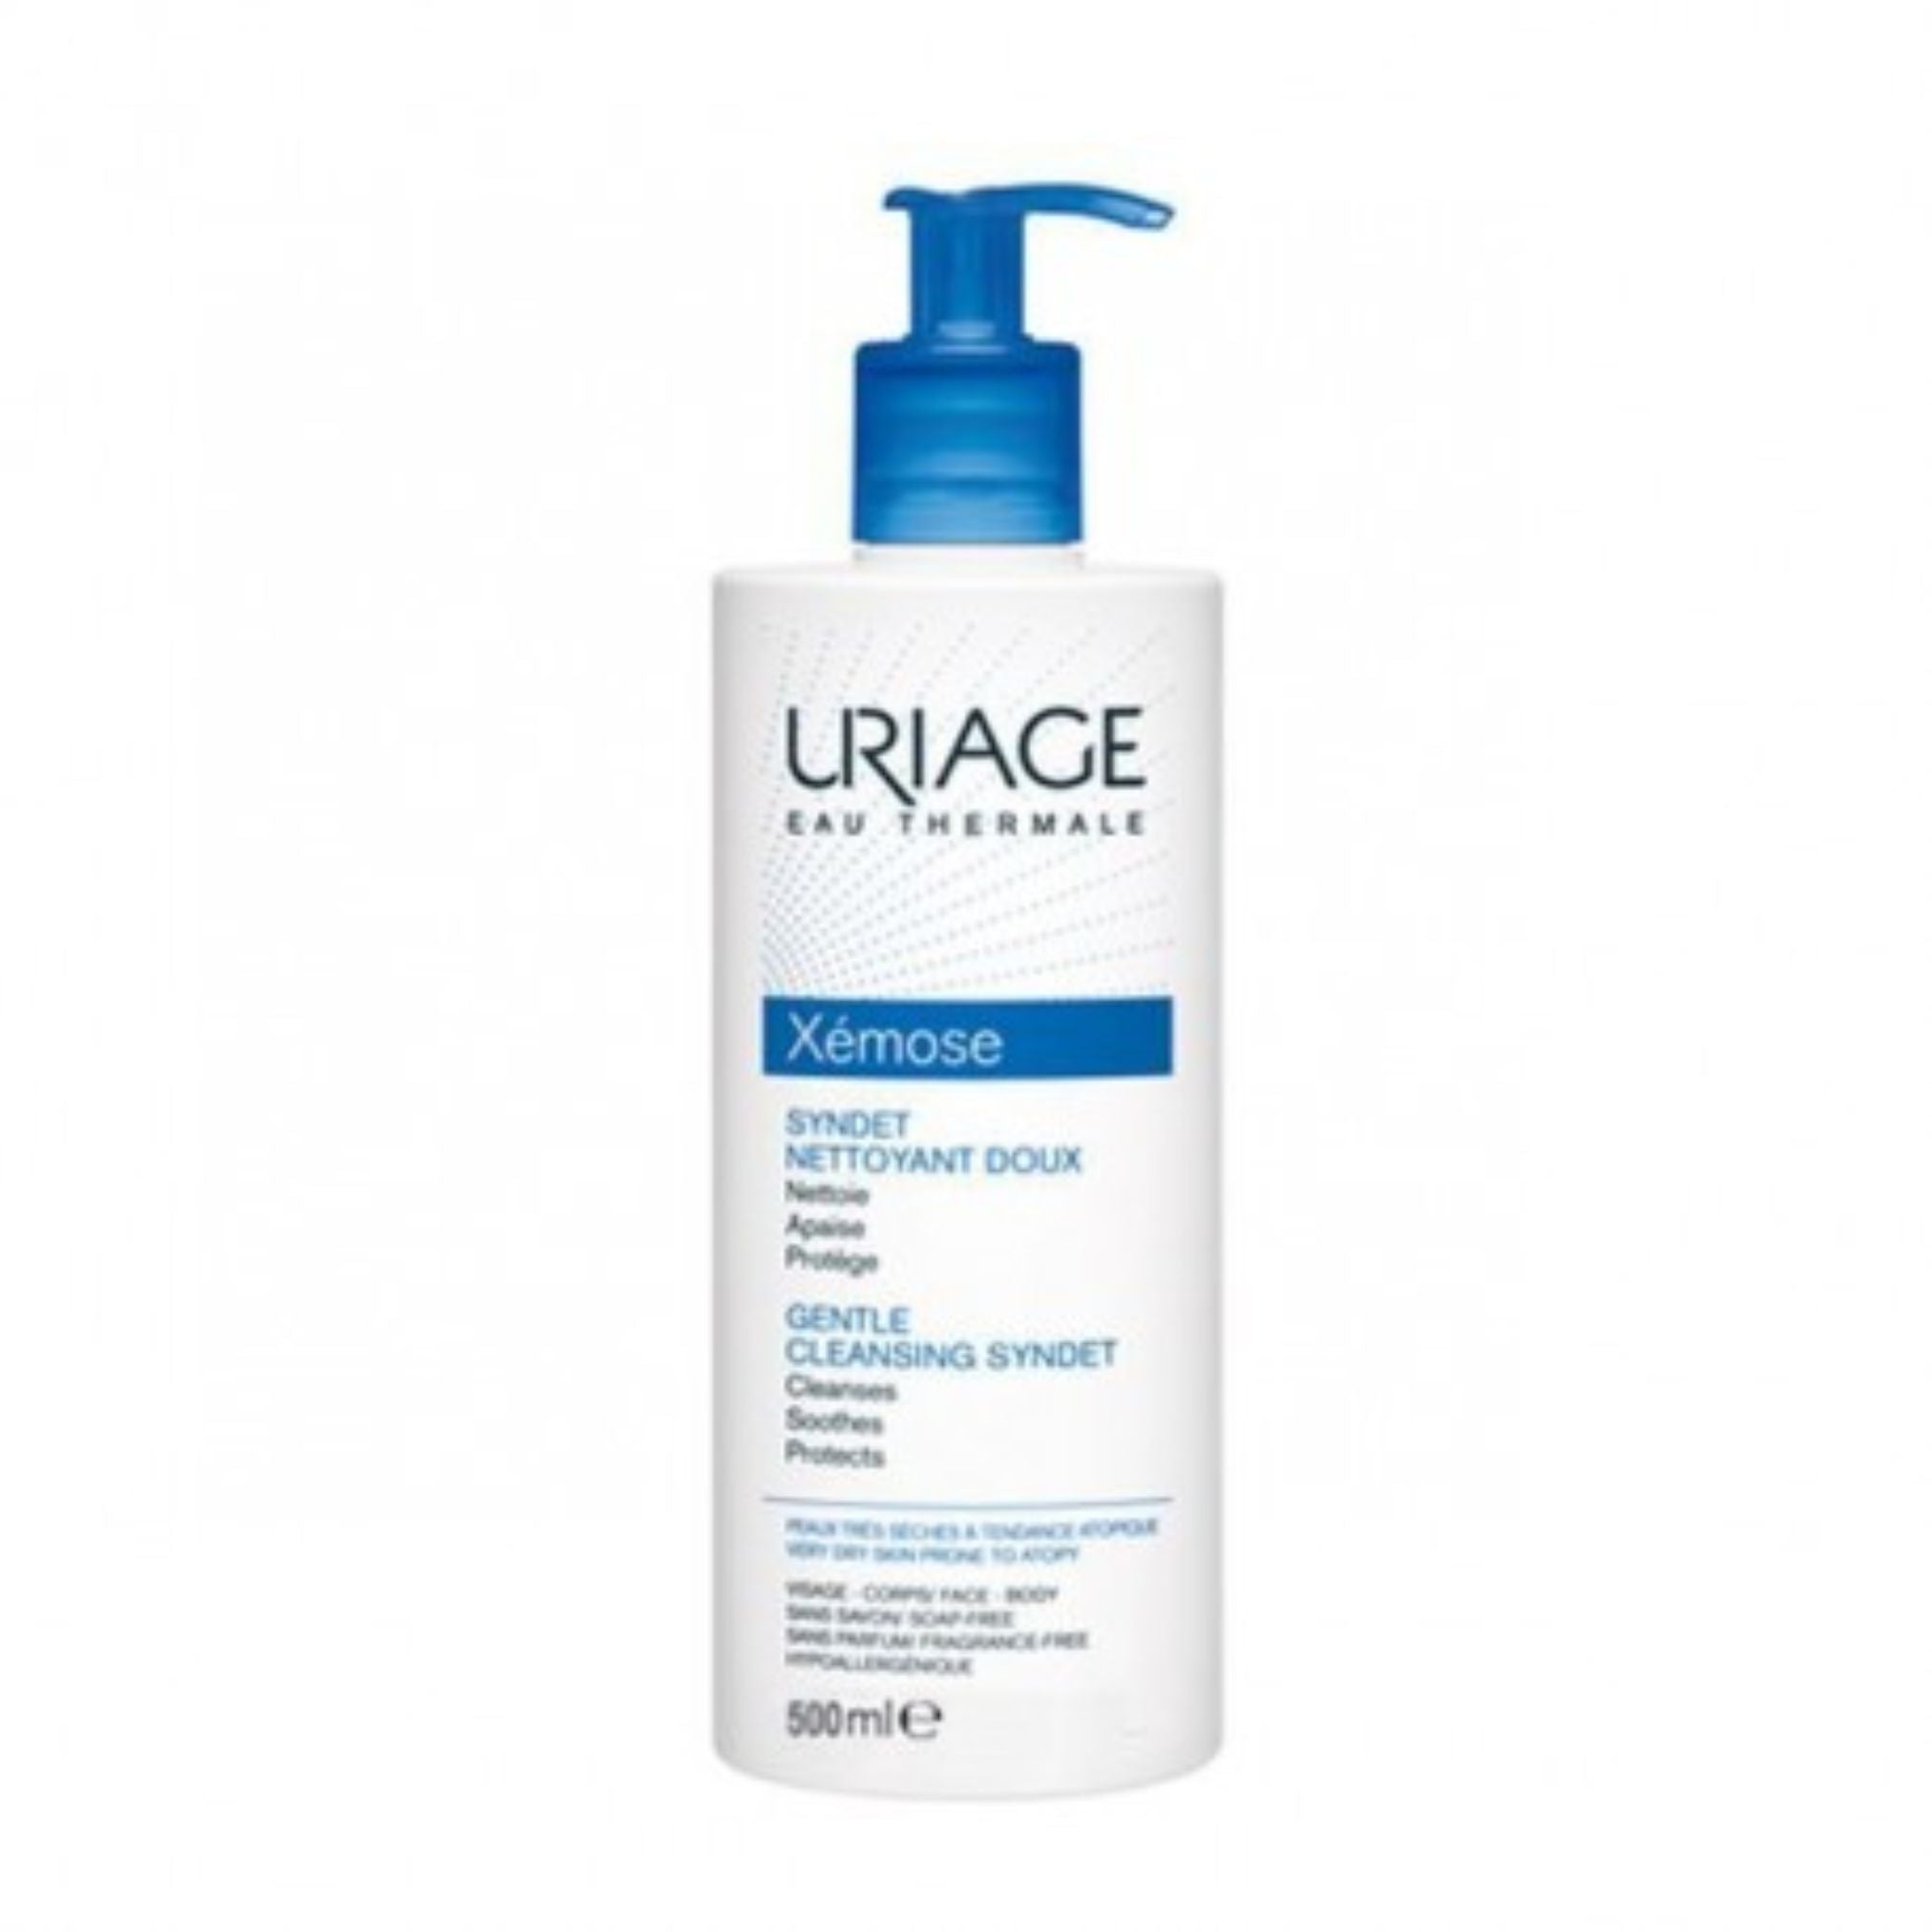 Uriage Eau Thermale Xémose Syndet Gel Creme Limpeza 500ml